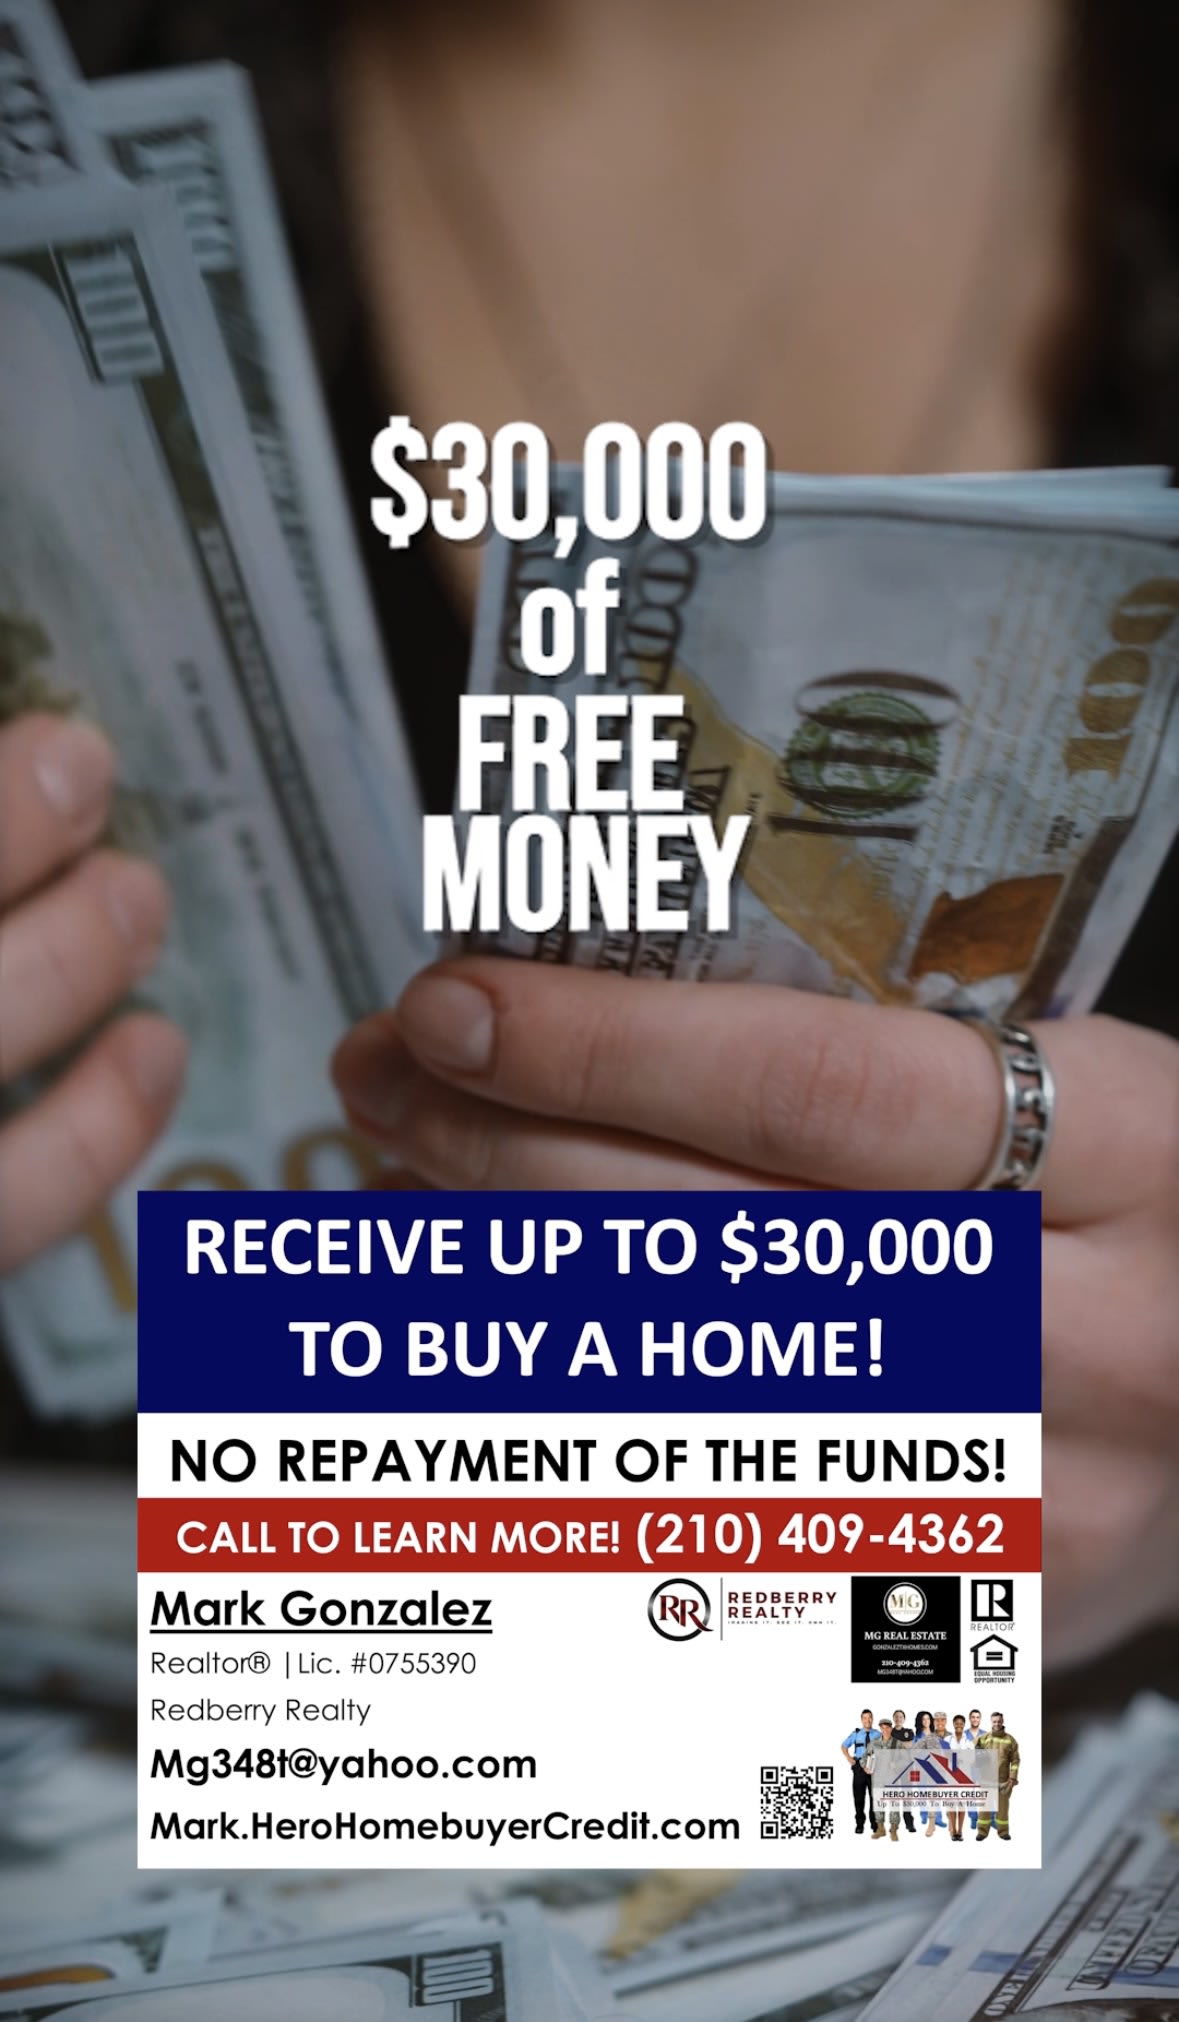 💸 FREE $30K FOR YOUR NEW HOME! 💸 INTRODUCING OUR HEROS HOMEBUYER CREDIT PROGRAM!!